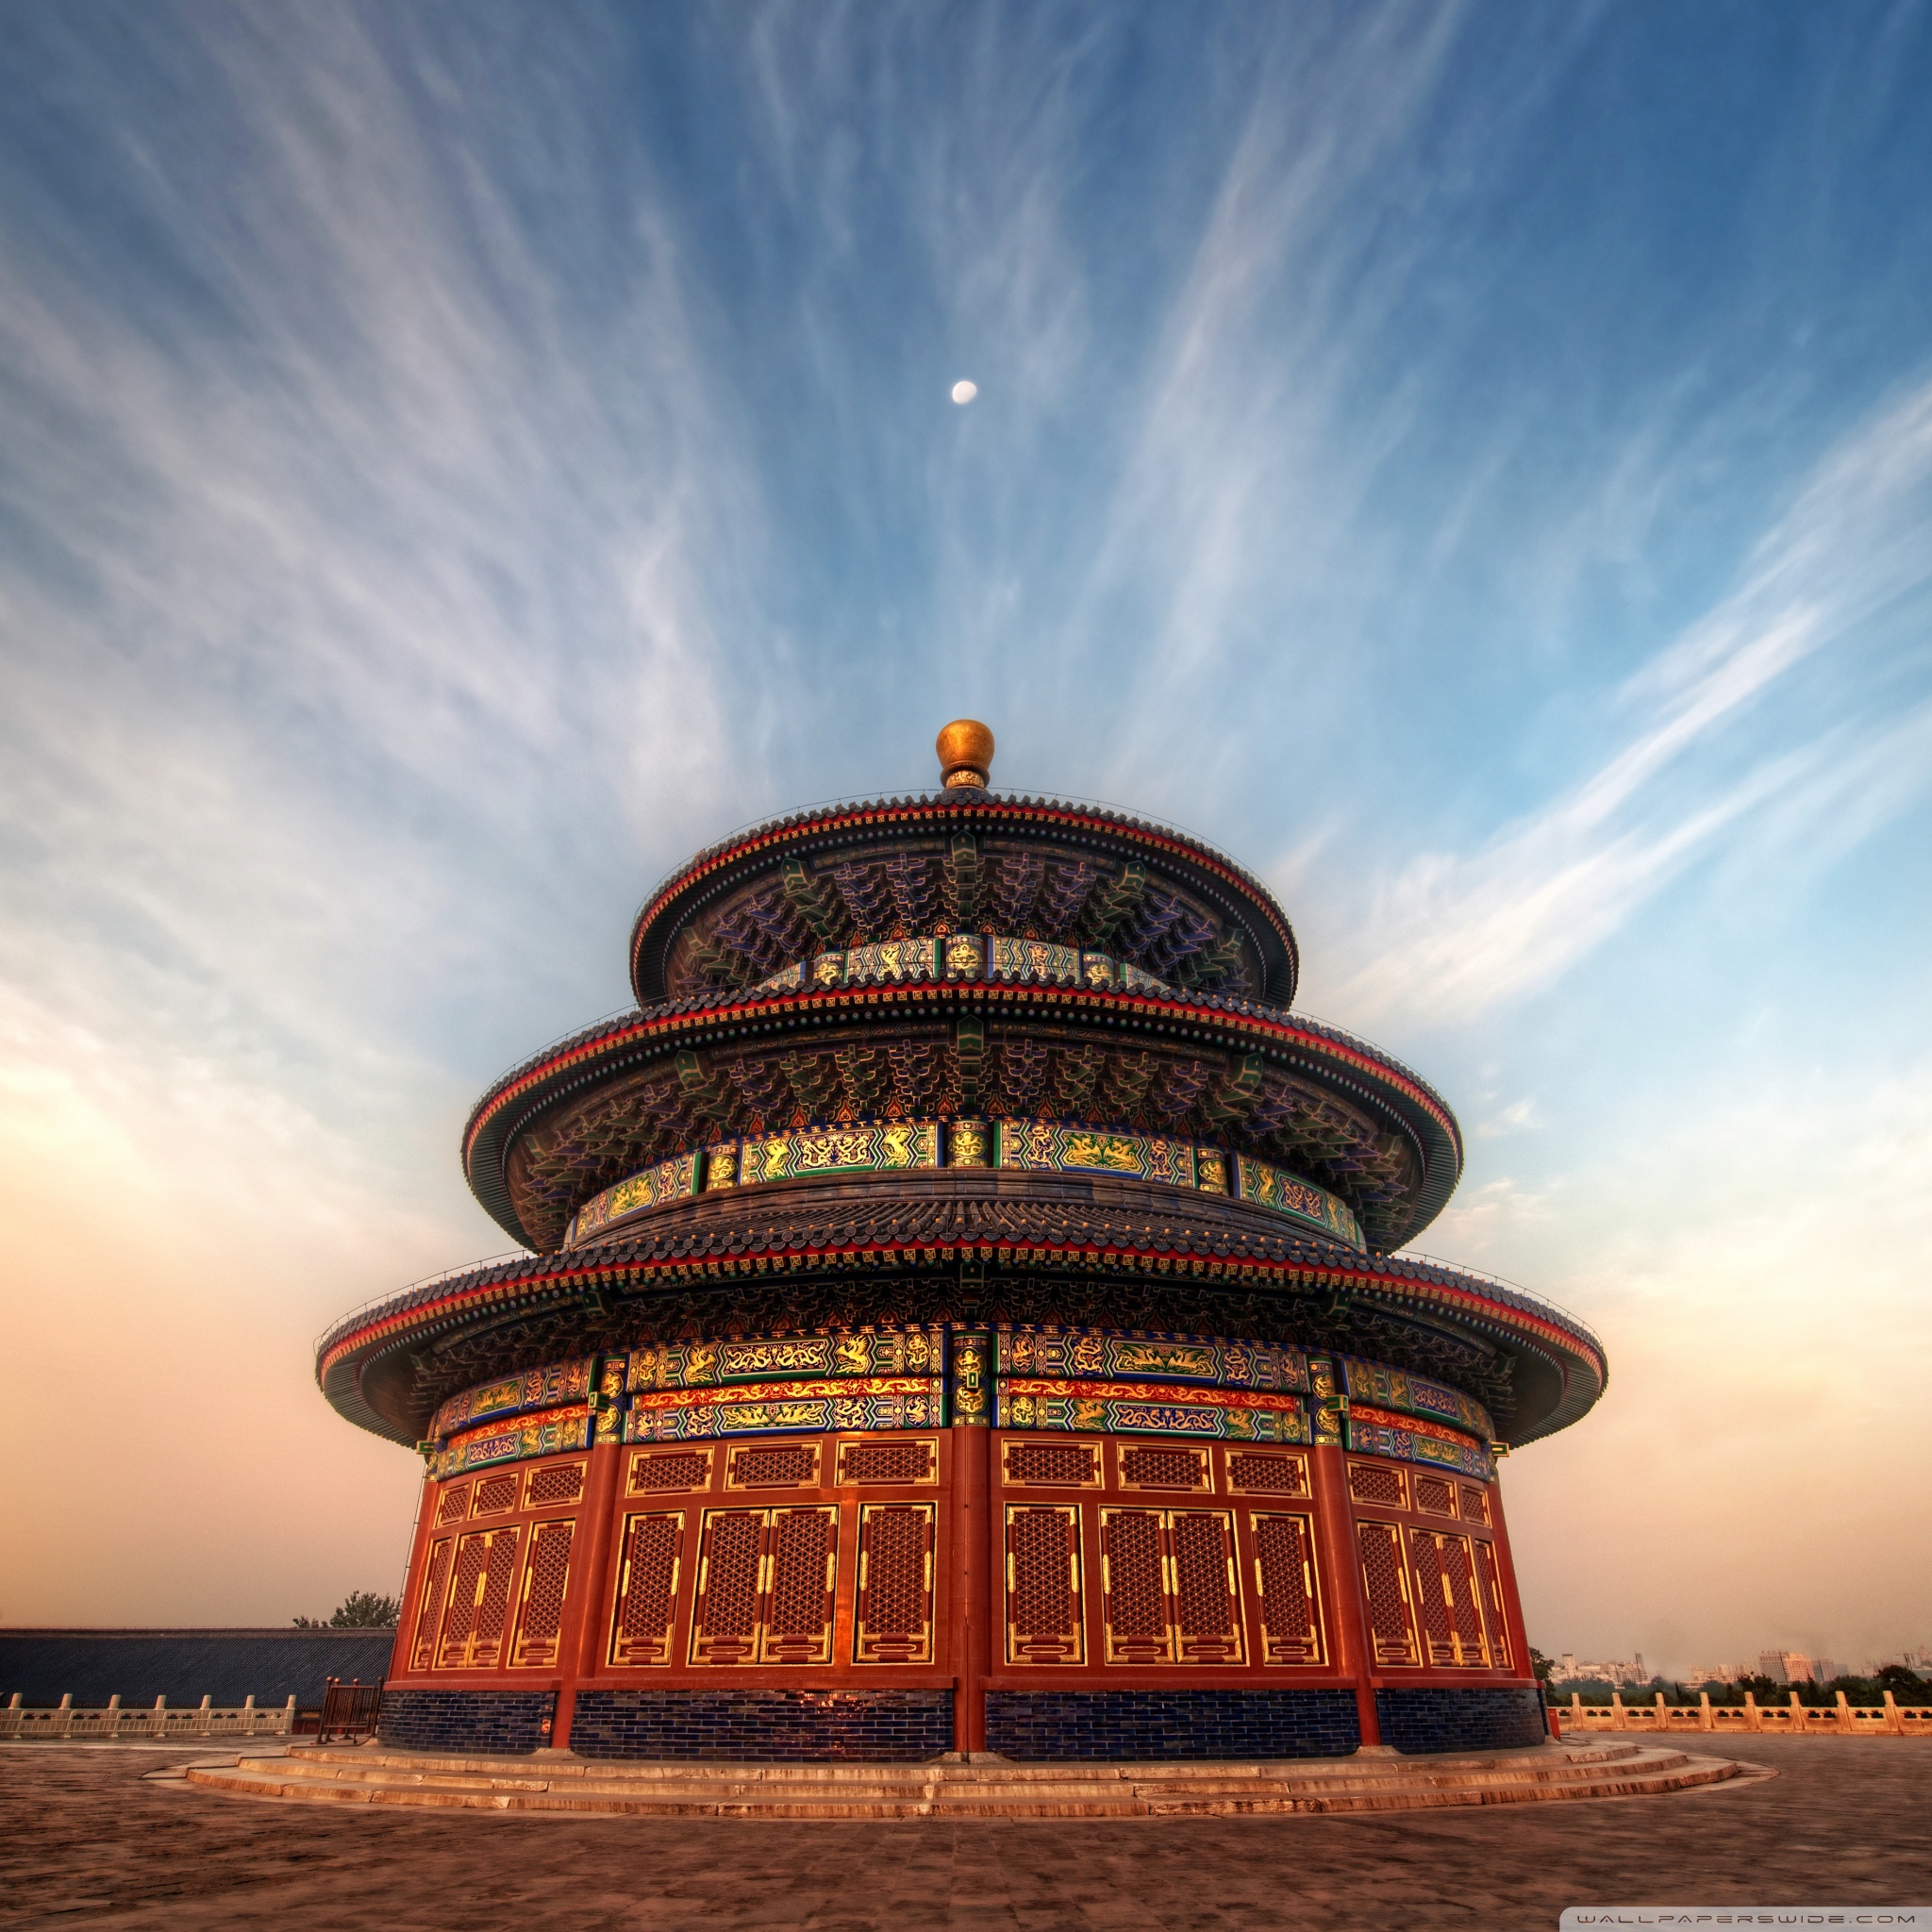 The Temple Of Heaven China Ultra HD Desktop Background Wallpaper for 4K UHD TV, Tablet